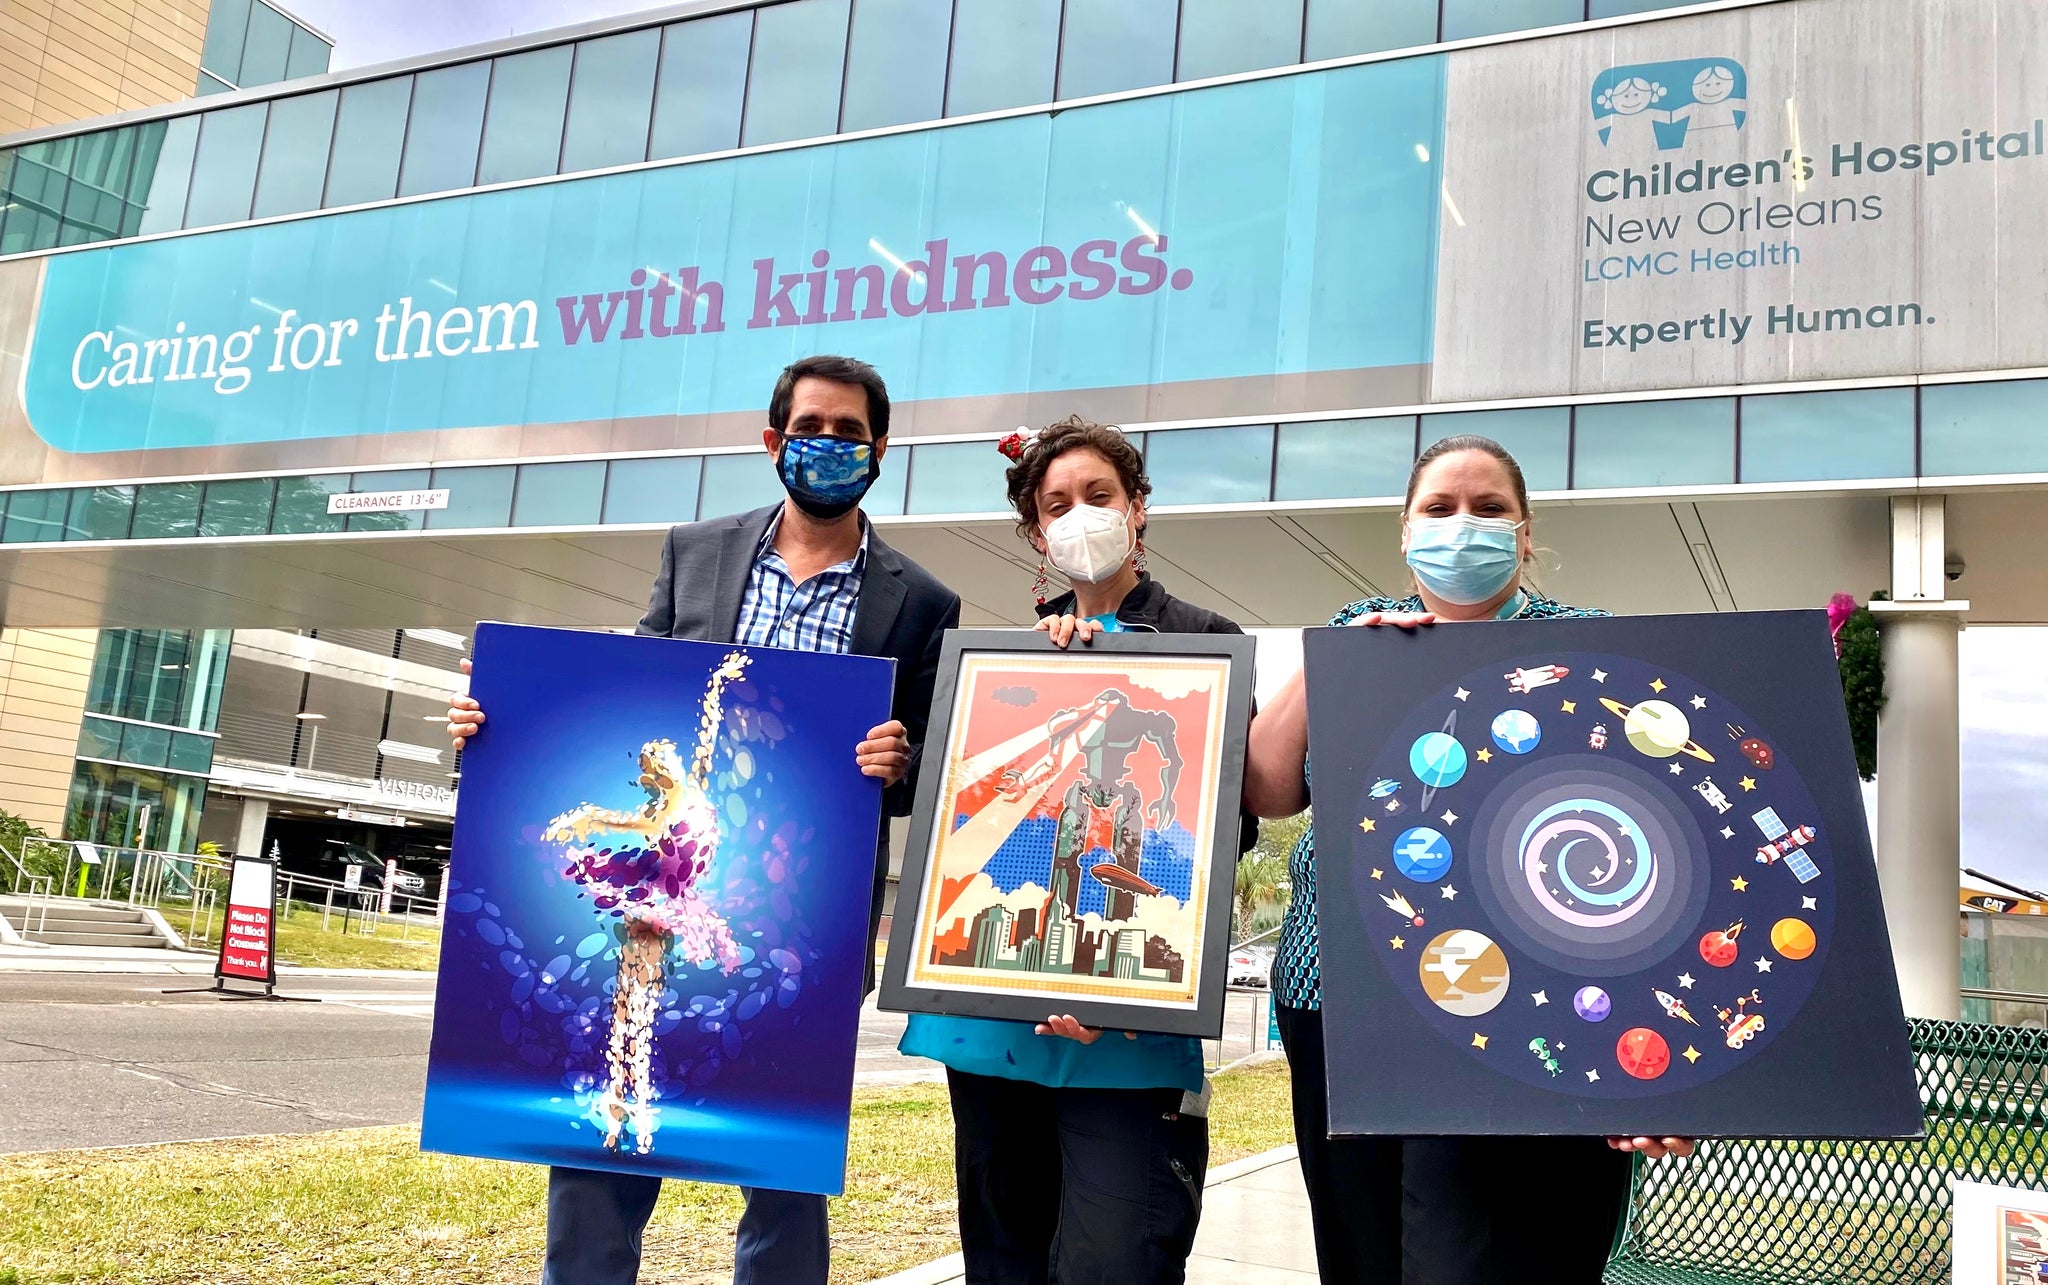 ARtscapes Donates 50 Prints to the Children's Hospital New Orleans as part of their 